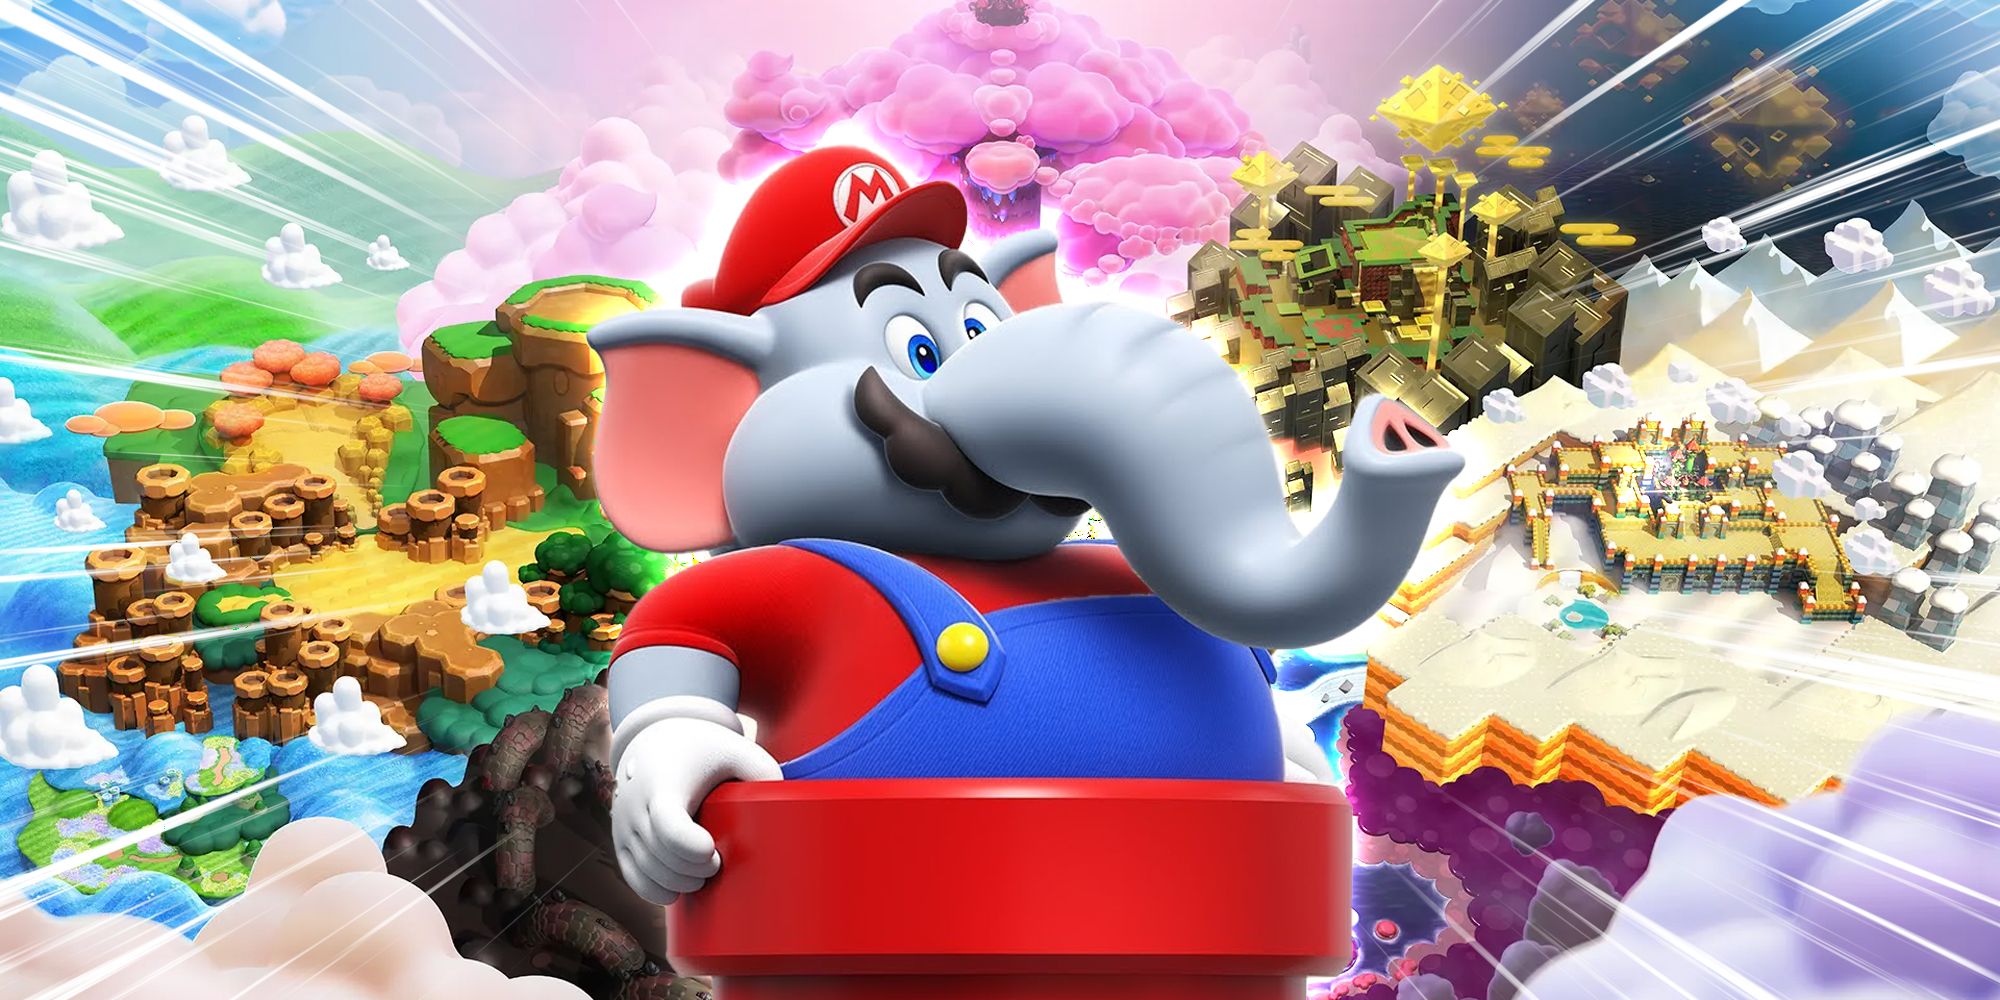 Elephant Mario bursting out of a red tube with Mario worlds visible in the background.